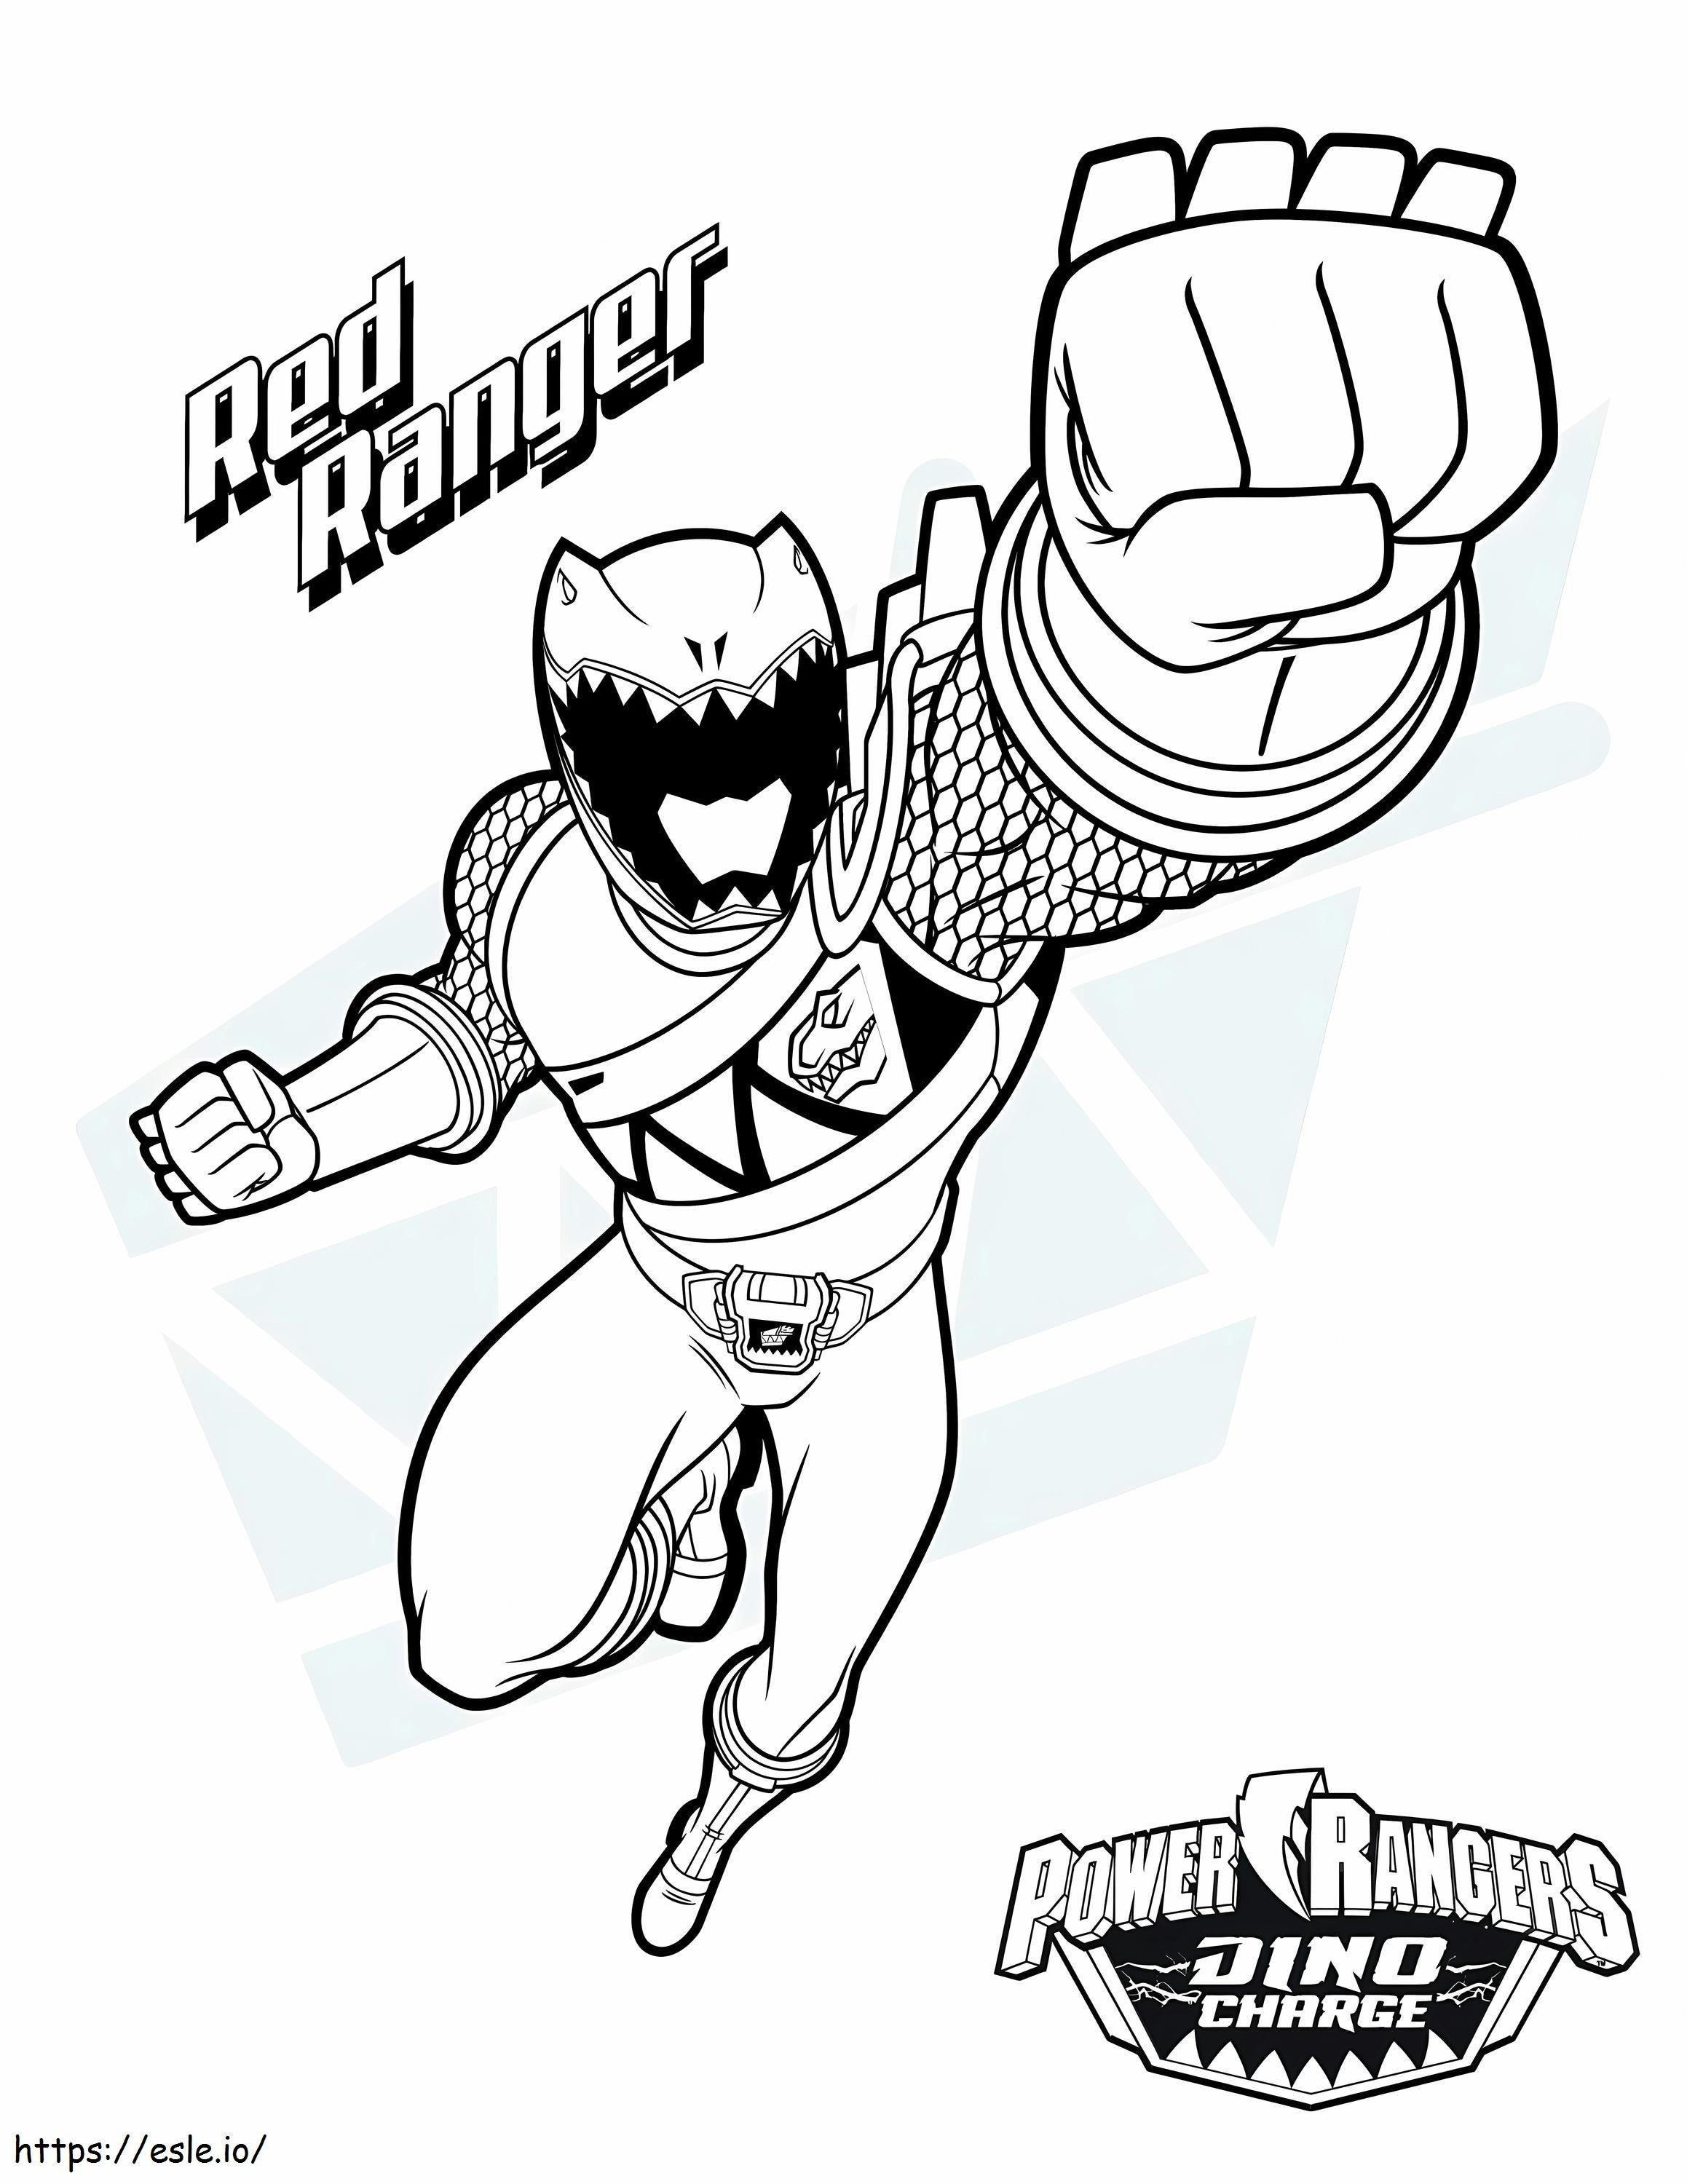 Power Ranger Coloring Books Fresh Mighty Morphin Power Rangers Power Ranger Dxj1T coloring page